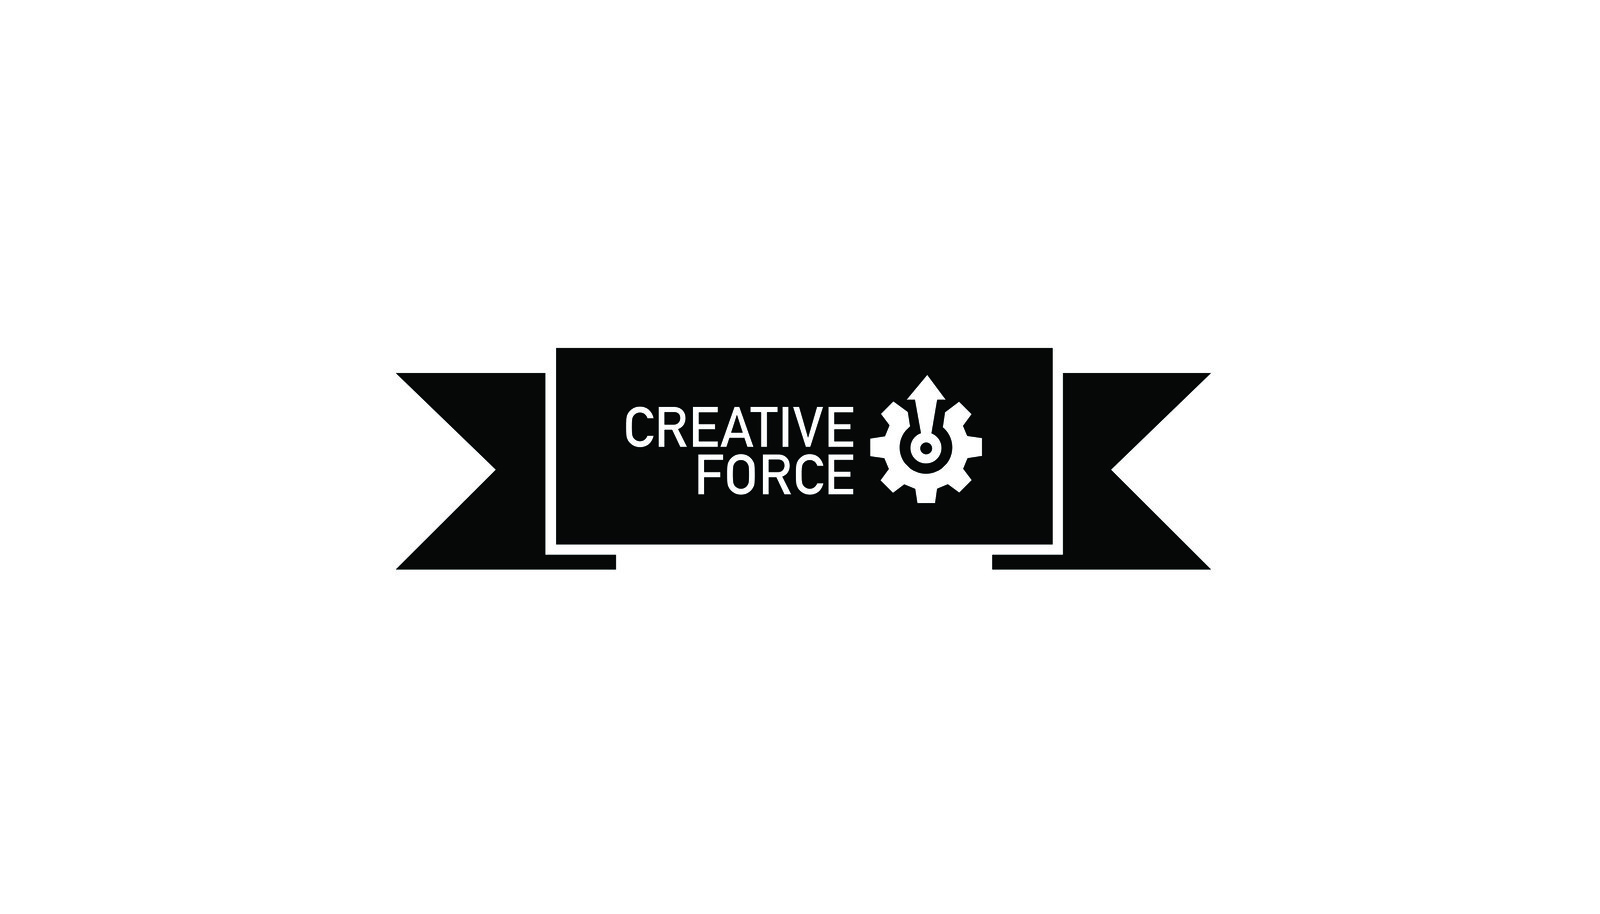 Branding made for Creative Force.
Creative Force was a community game dev project focusing on content for Halo 5.